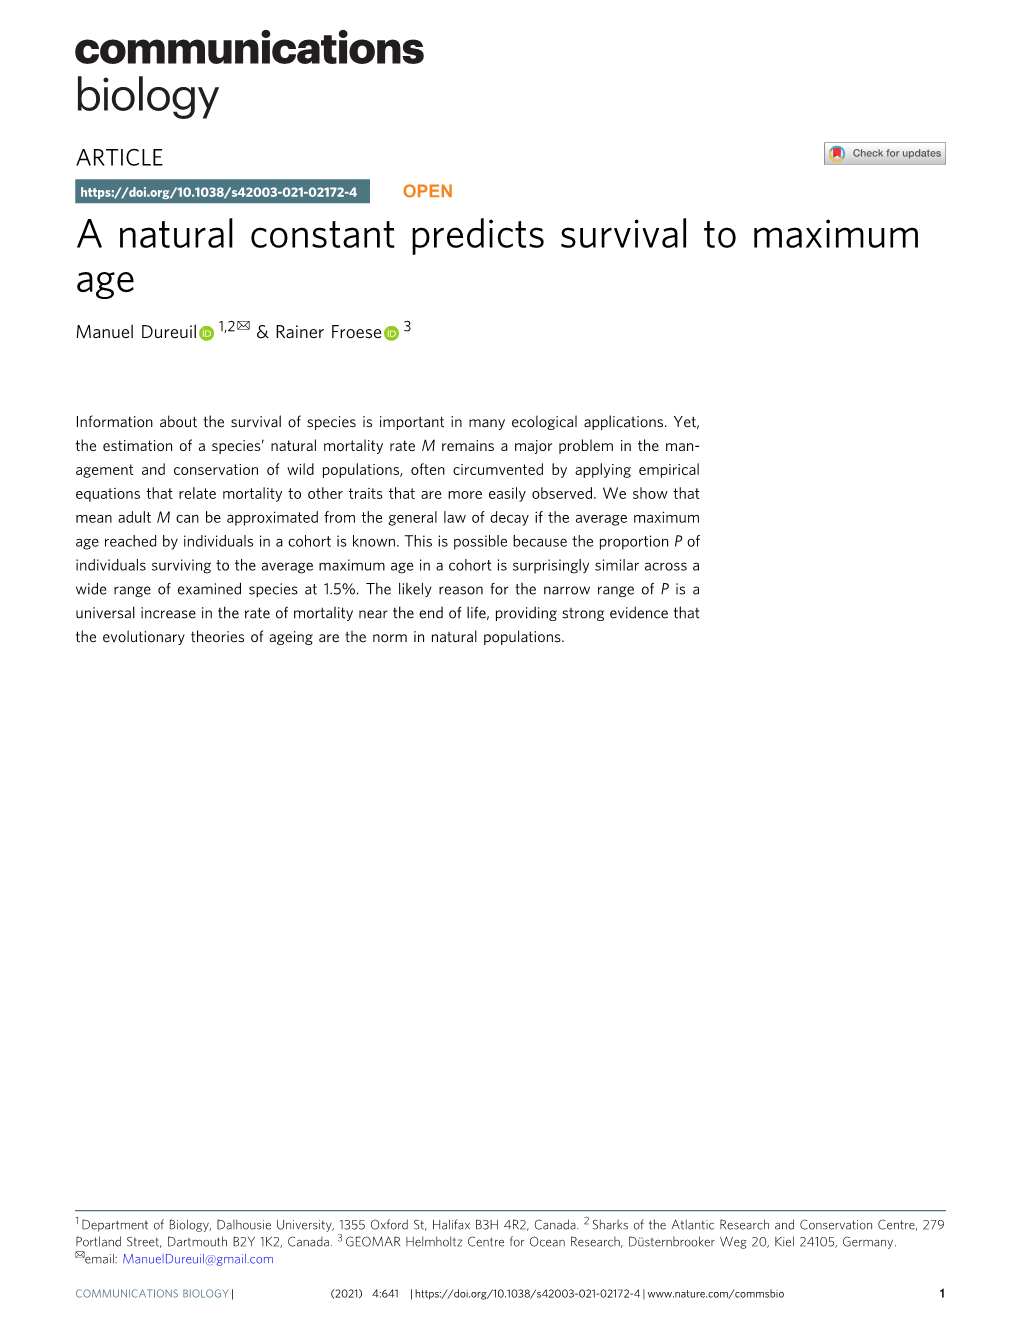 A Natural Constant Predicts Survival to Maximum Age ✉ Manuel Dureuil 1,2 & Rainer Froese 3